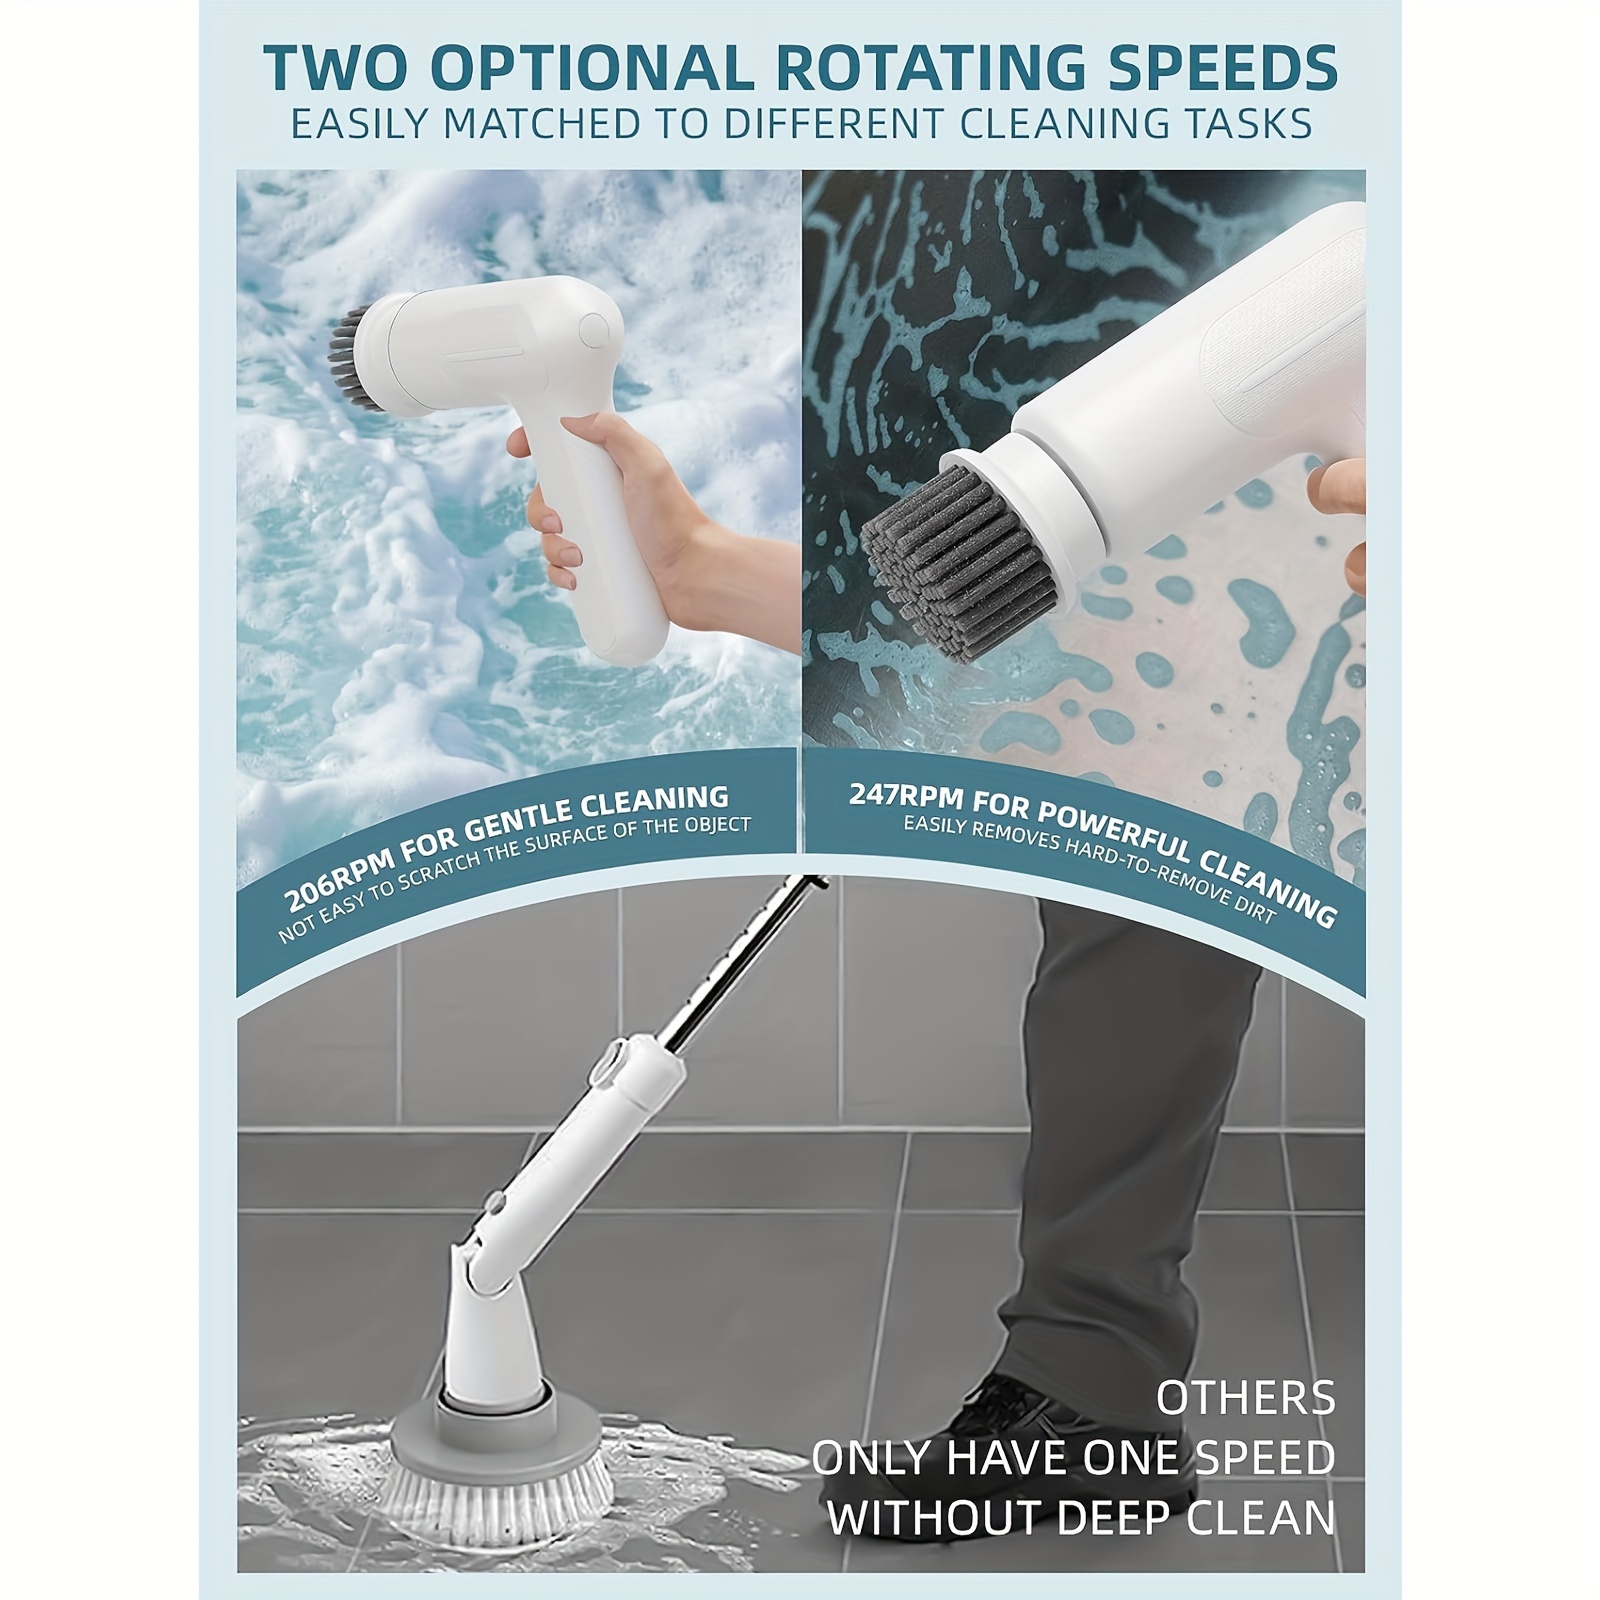 

Cordless Kitchen Cleaning Brush, Handheld Electric Spin Scrubber Cordless Tub And Tile Scrubber With 8 Replaceable Brushes Heads, 2 Speeds For Bathroom/sinks, White